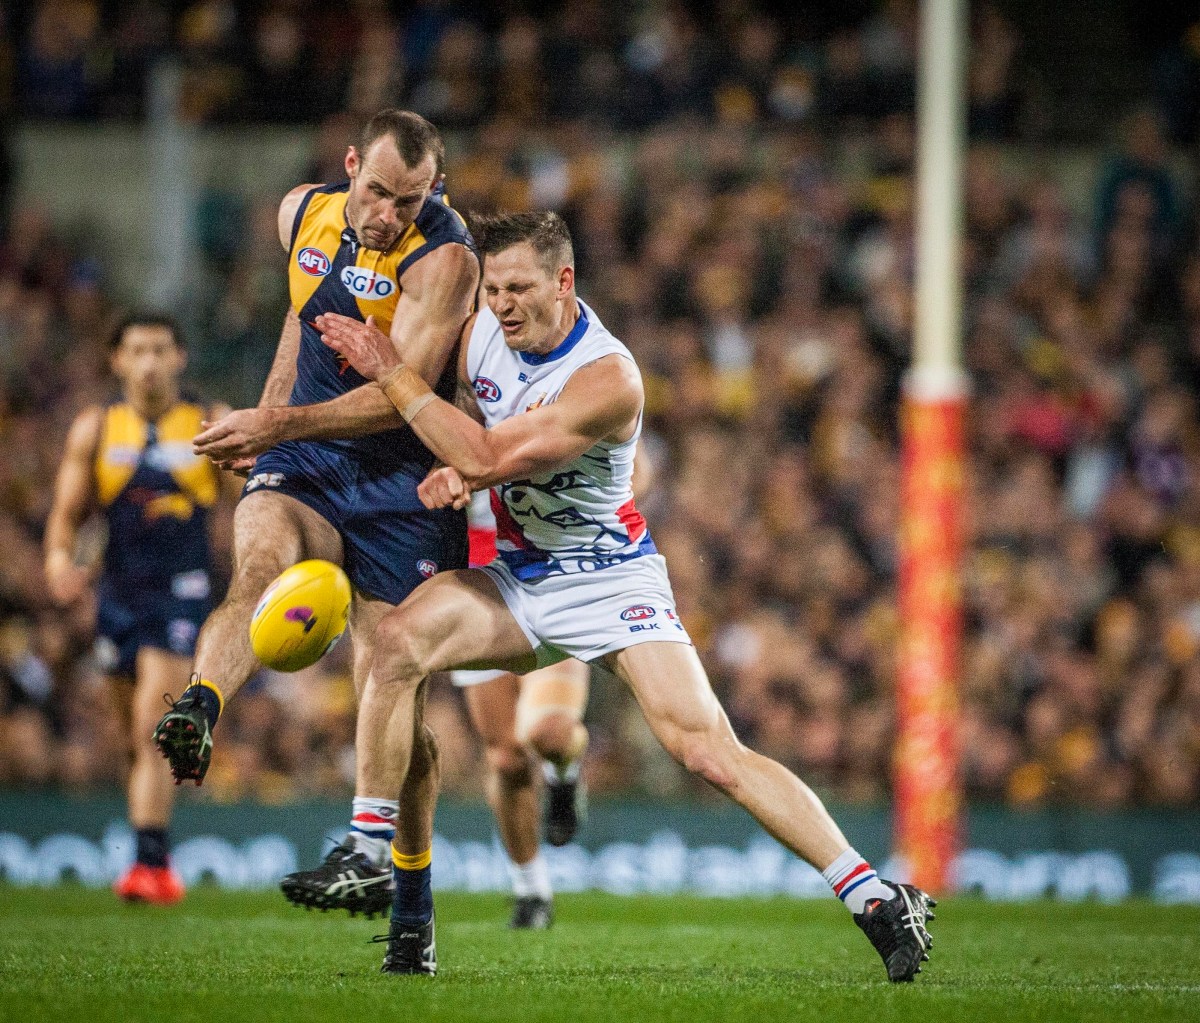 Shannon Hurn of the West Coast Eagles and Clay Smith of the Western Bulldogs  during the AFL Elimination Final between the West Coast Eagles and the Western Bulldogs at Domain Stadium Stadium in Perth, Thursday, Sept. 8, 2016. (AAP Image/Tony McDonough) NO ARCHIVING, EDITORIAL USE ONLY